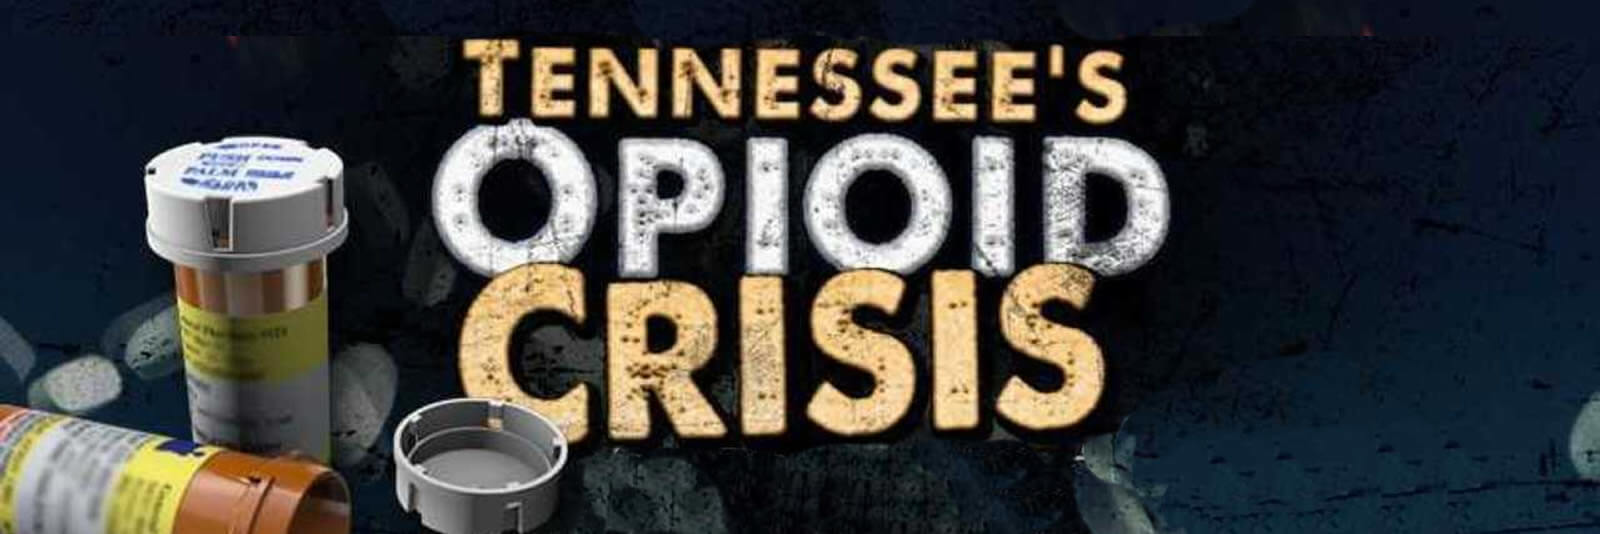 tennessee-opioid-crisis